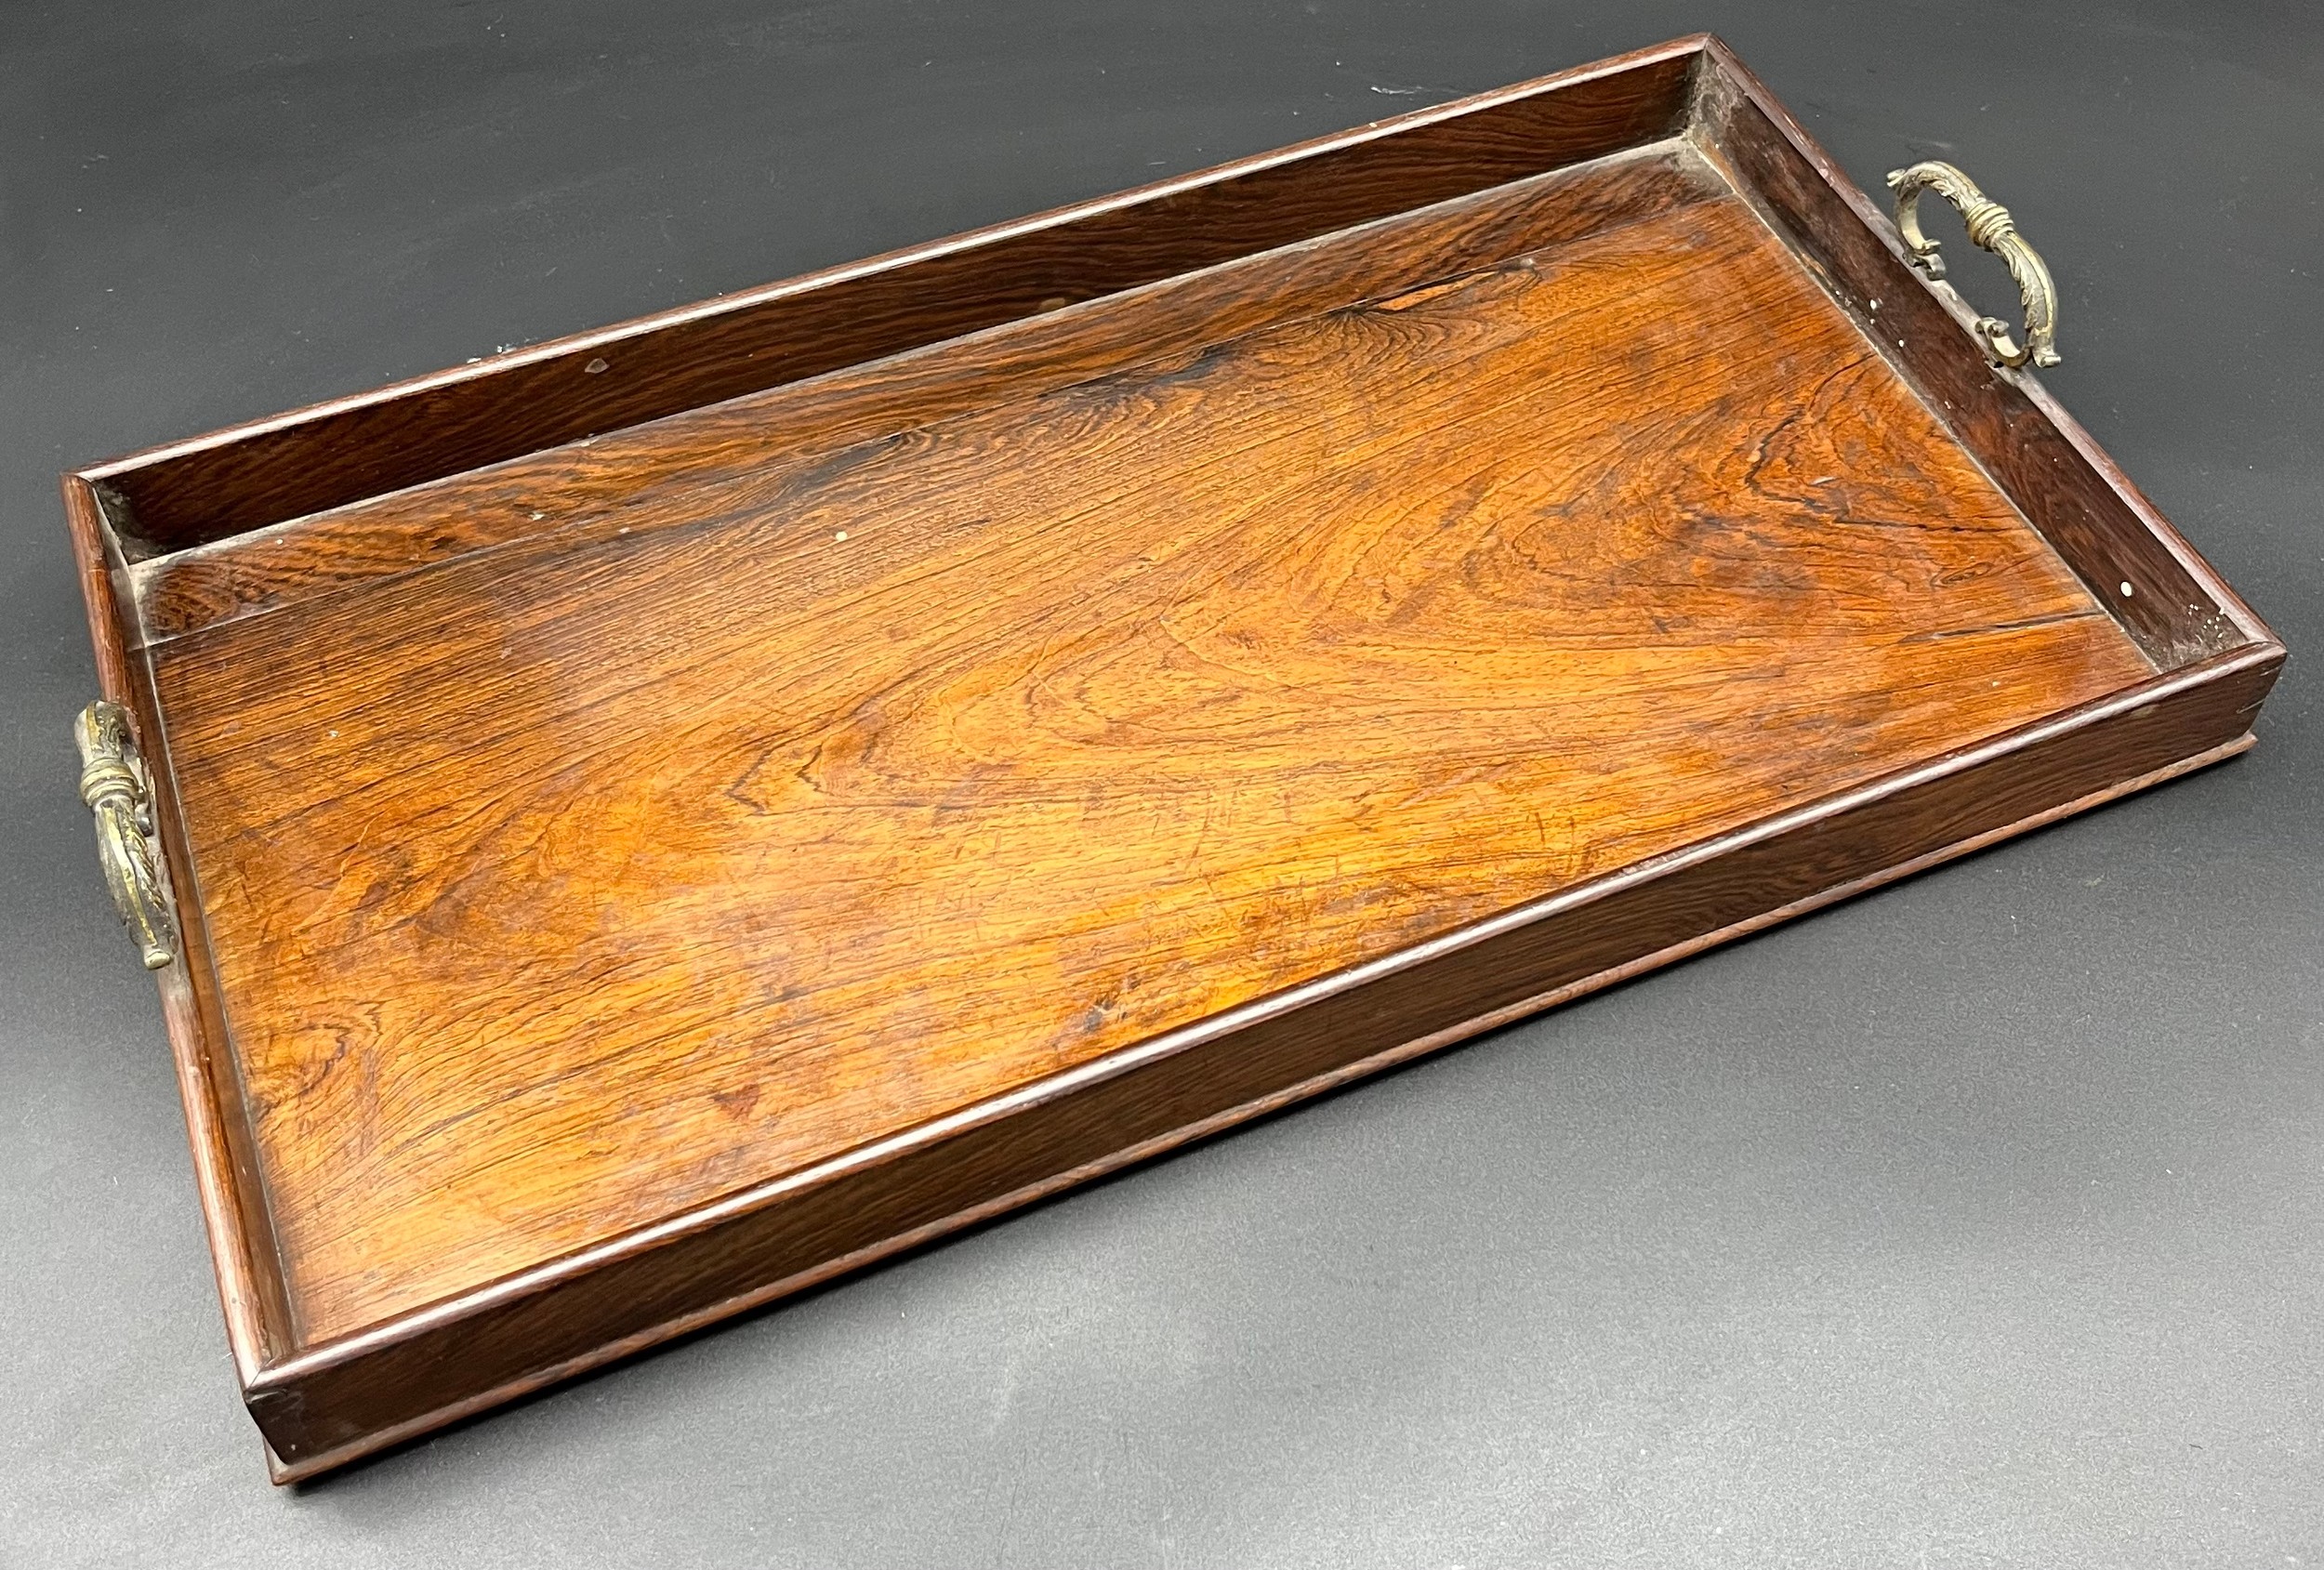 19th century wood and double brass handle serving tray. [47x26cm]